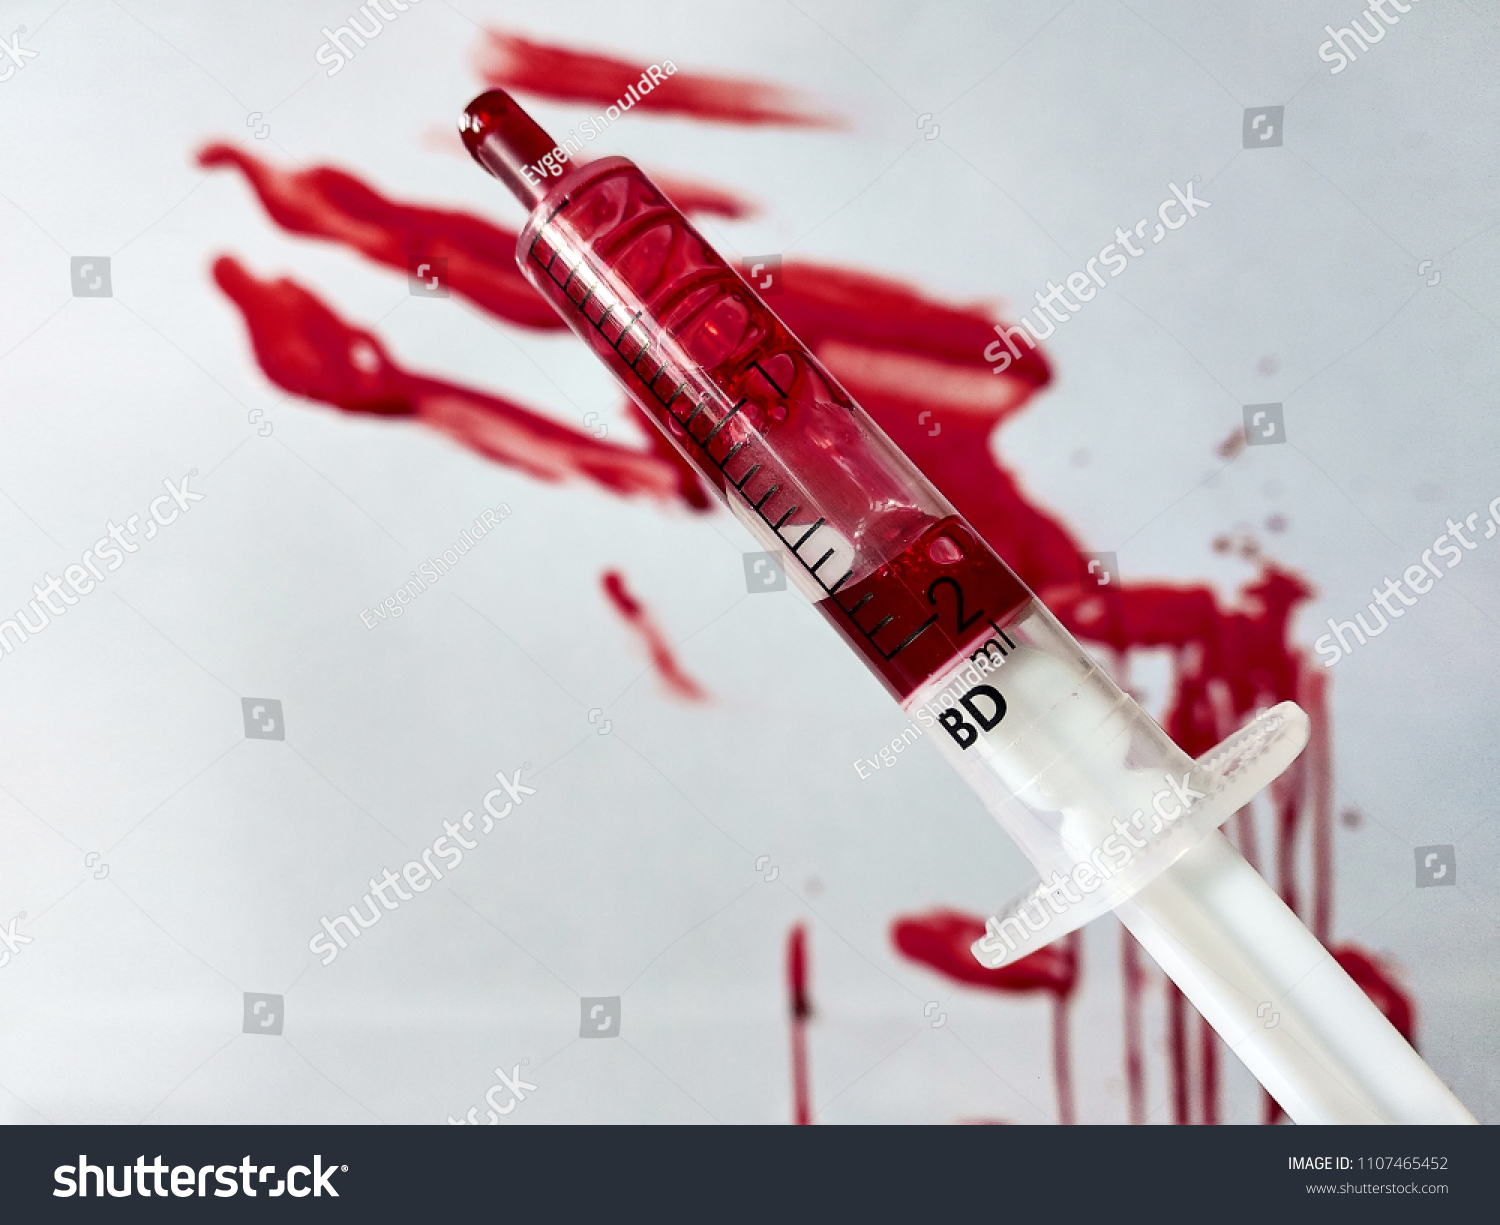 Syringe and blood splats and smears #1107465452